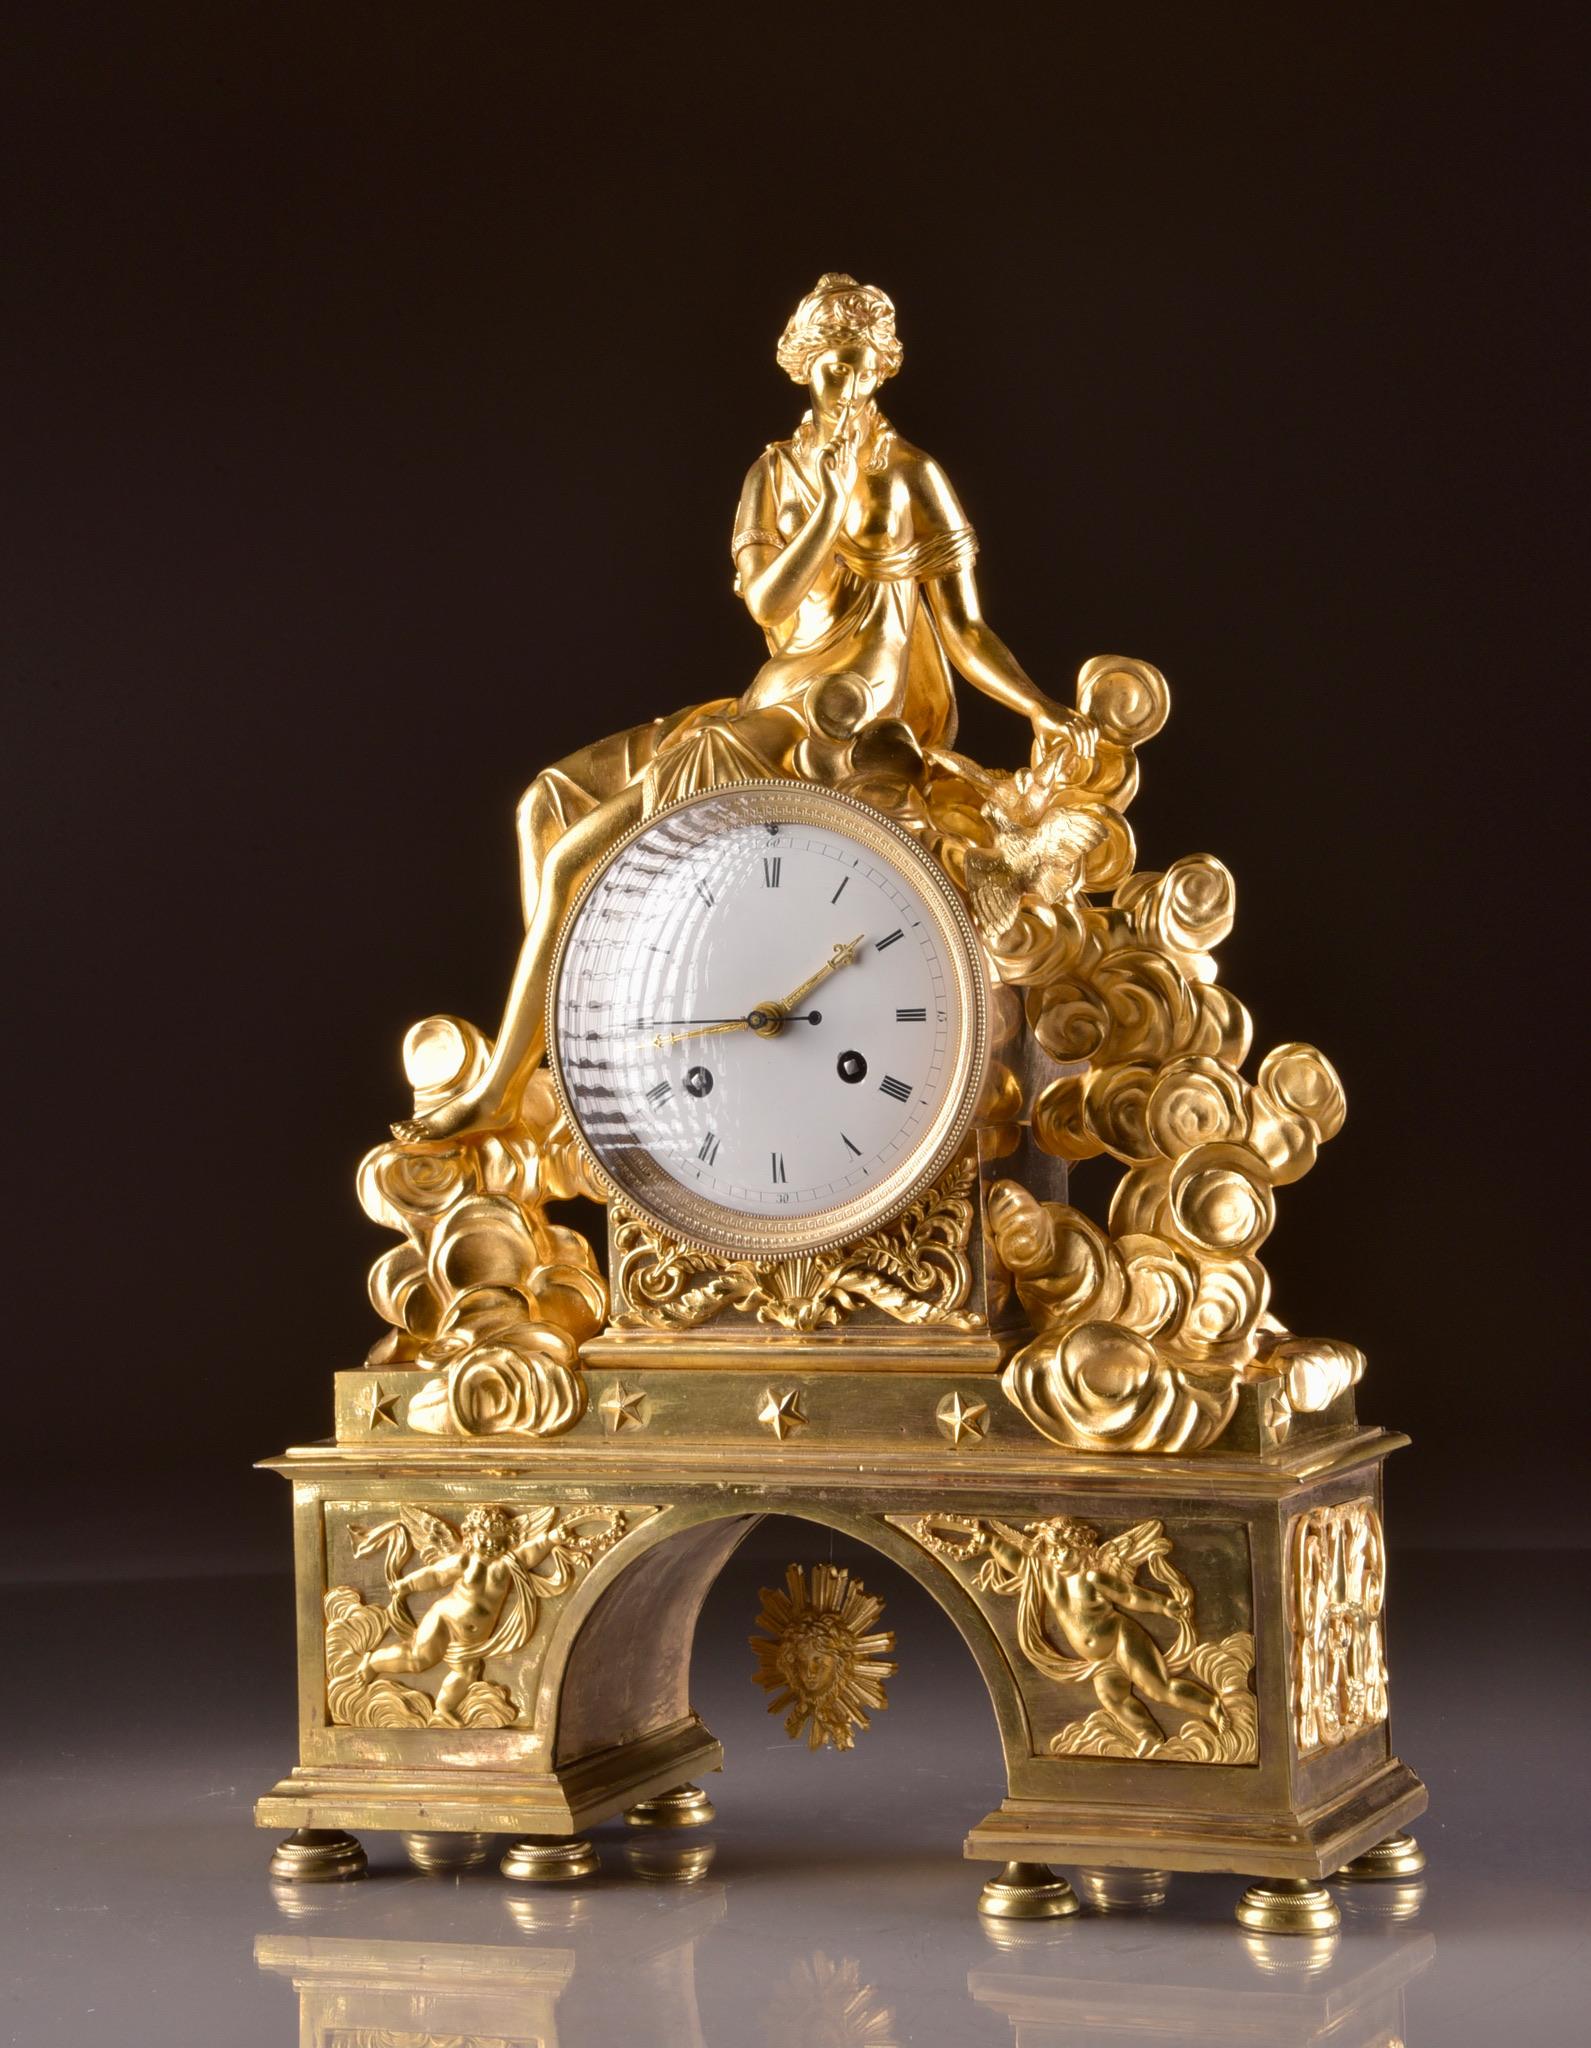 Rare Large Romantic French Directoire Mantel Clock, Late 18th C For Sale 9